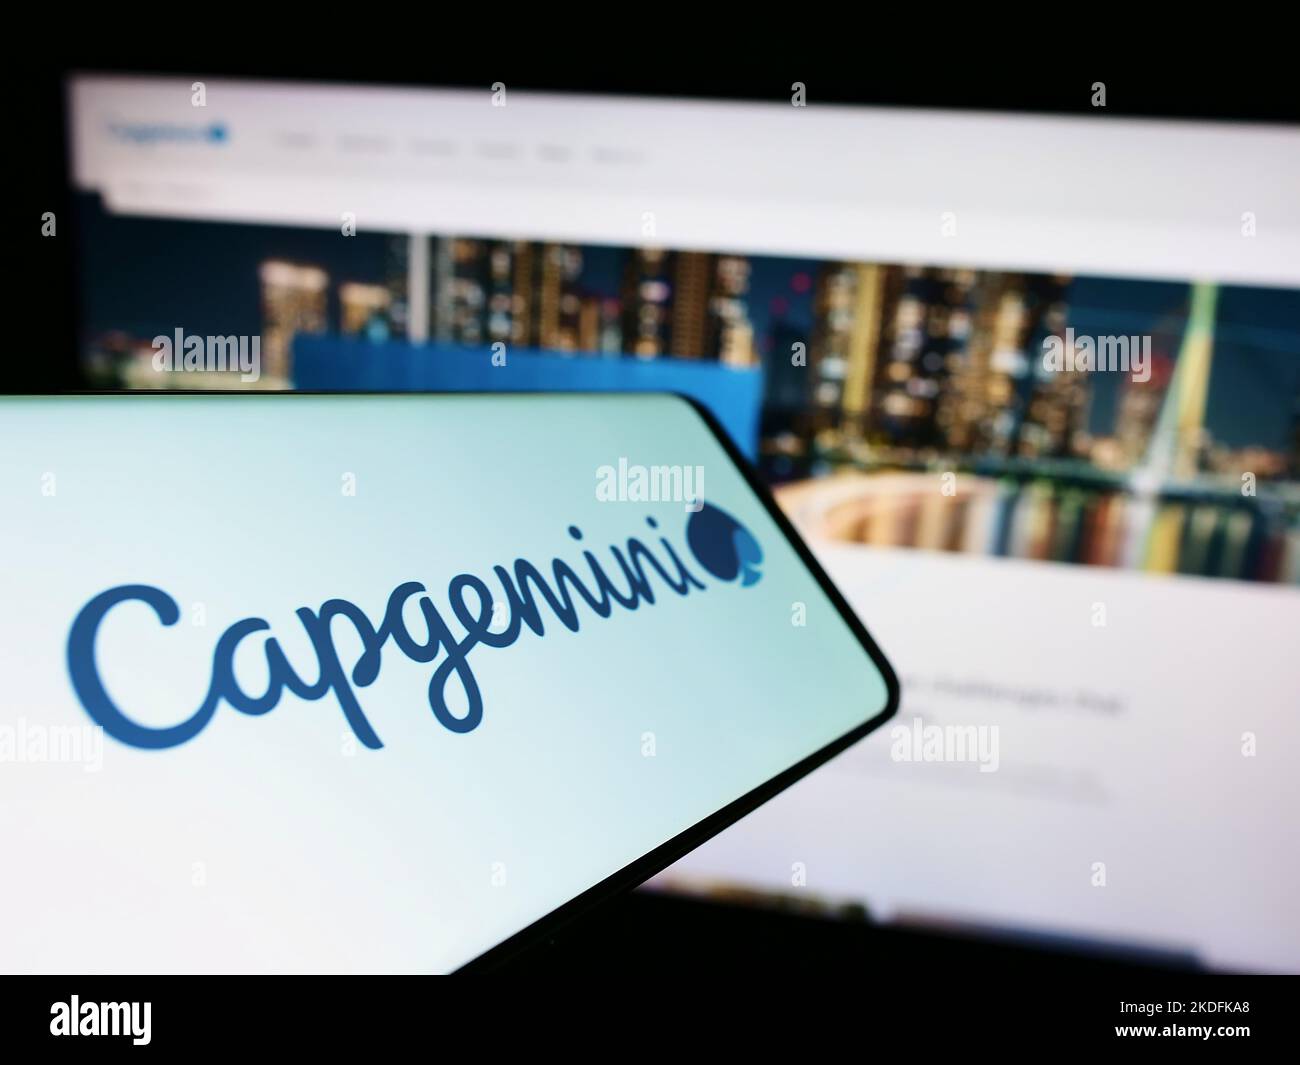 Cellphone with logo of information technology company Capgemini SE on screen in front of business website. Focus on center-left of phone display. Stock Photo